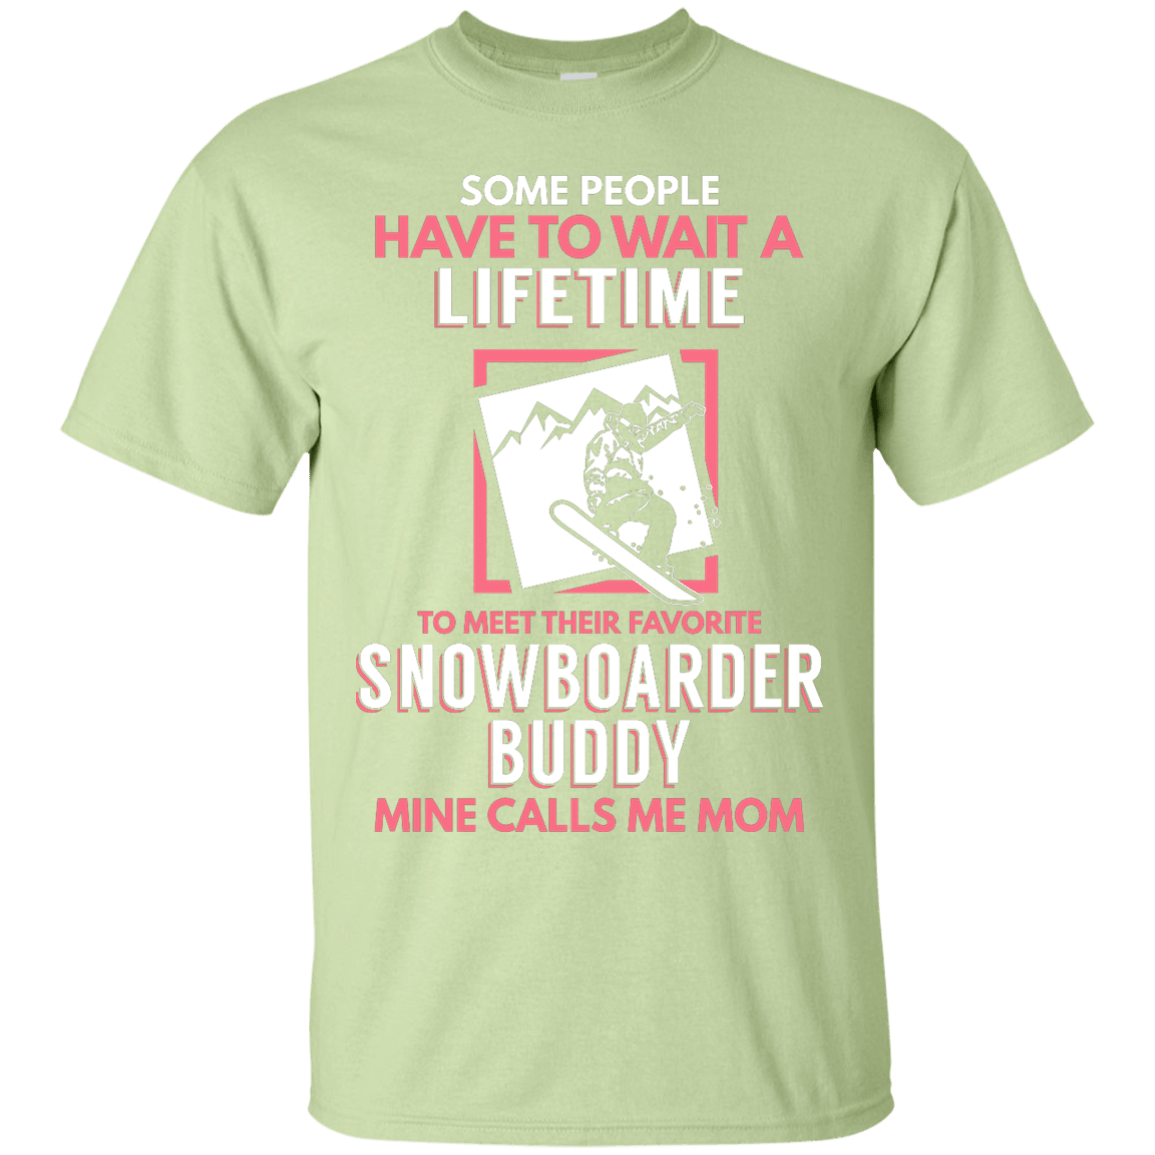 Some People Have To Wait A Lifetime To Meet Their Favorite Snowboarder Buddy Mine Calls Me Mom Tees - Powderaddicts